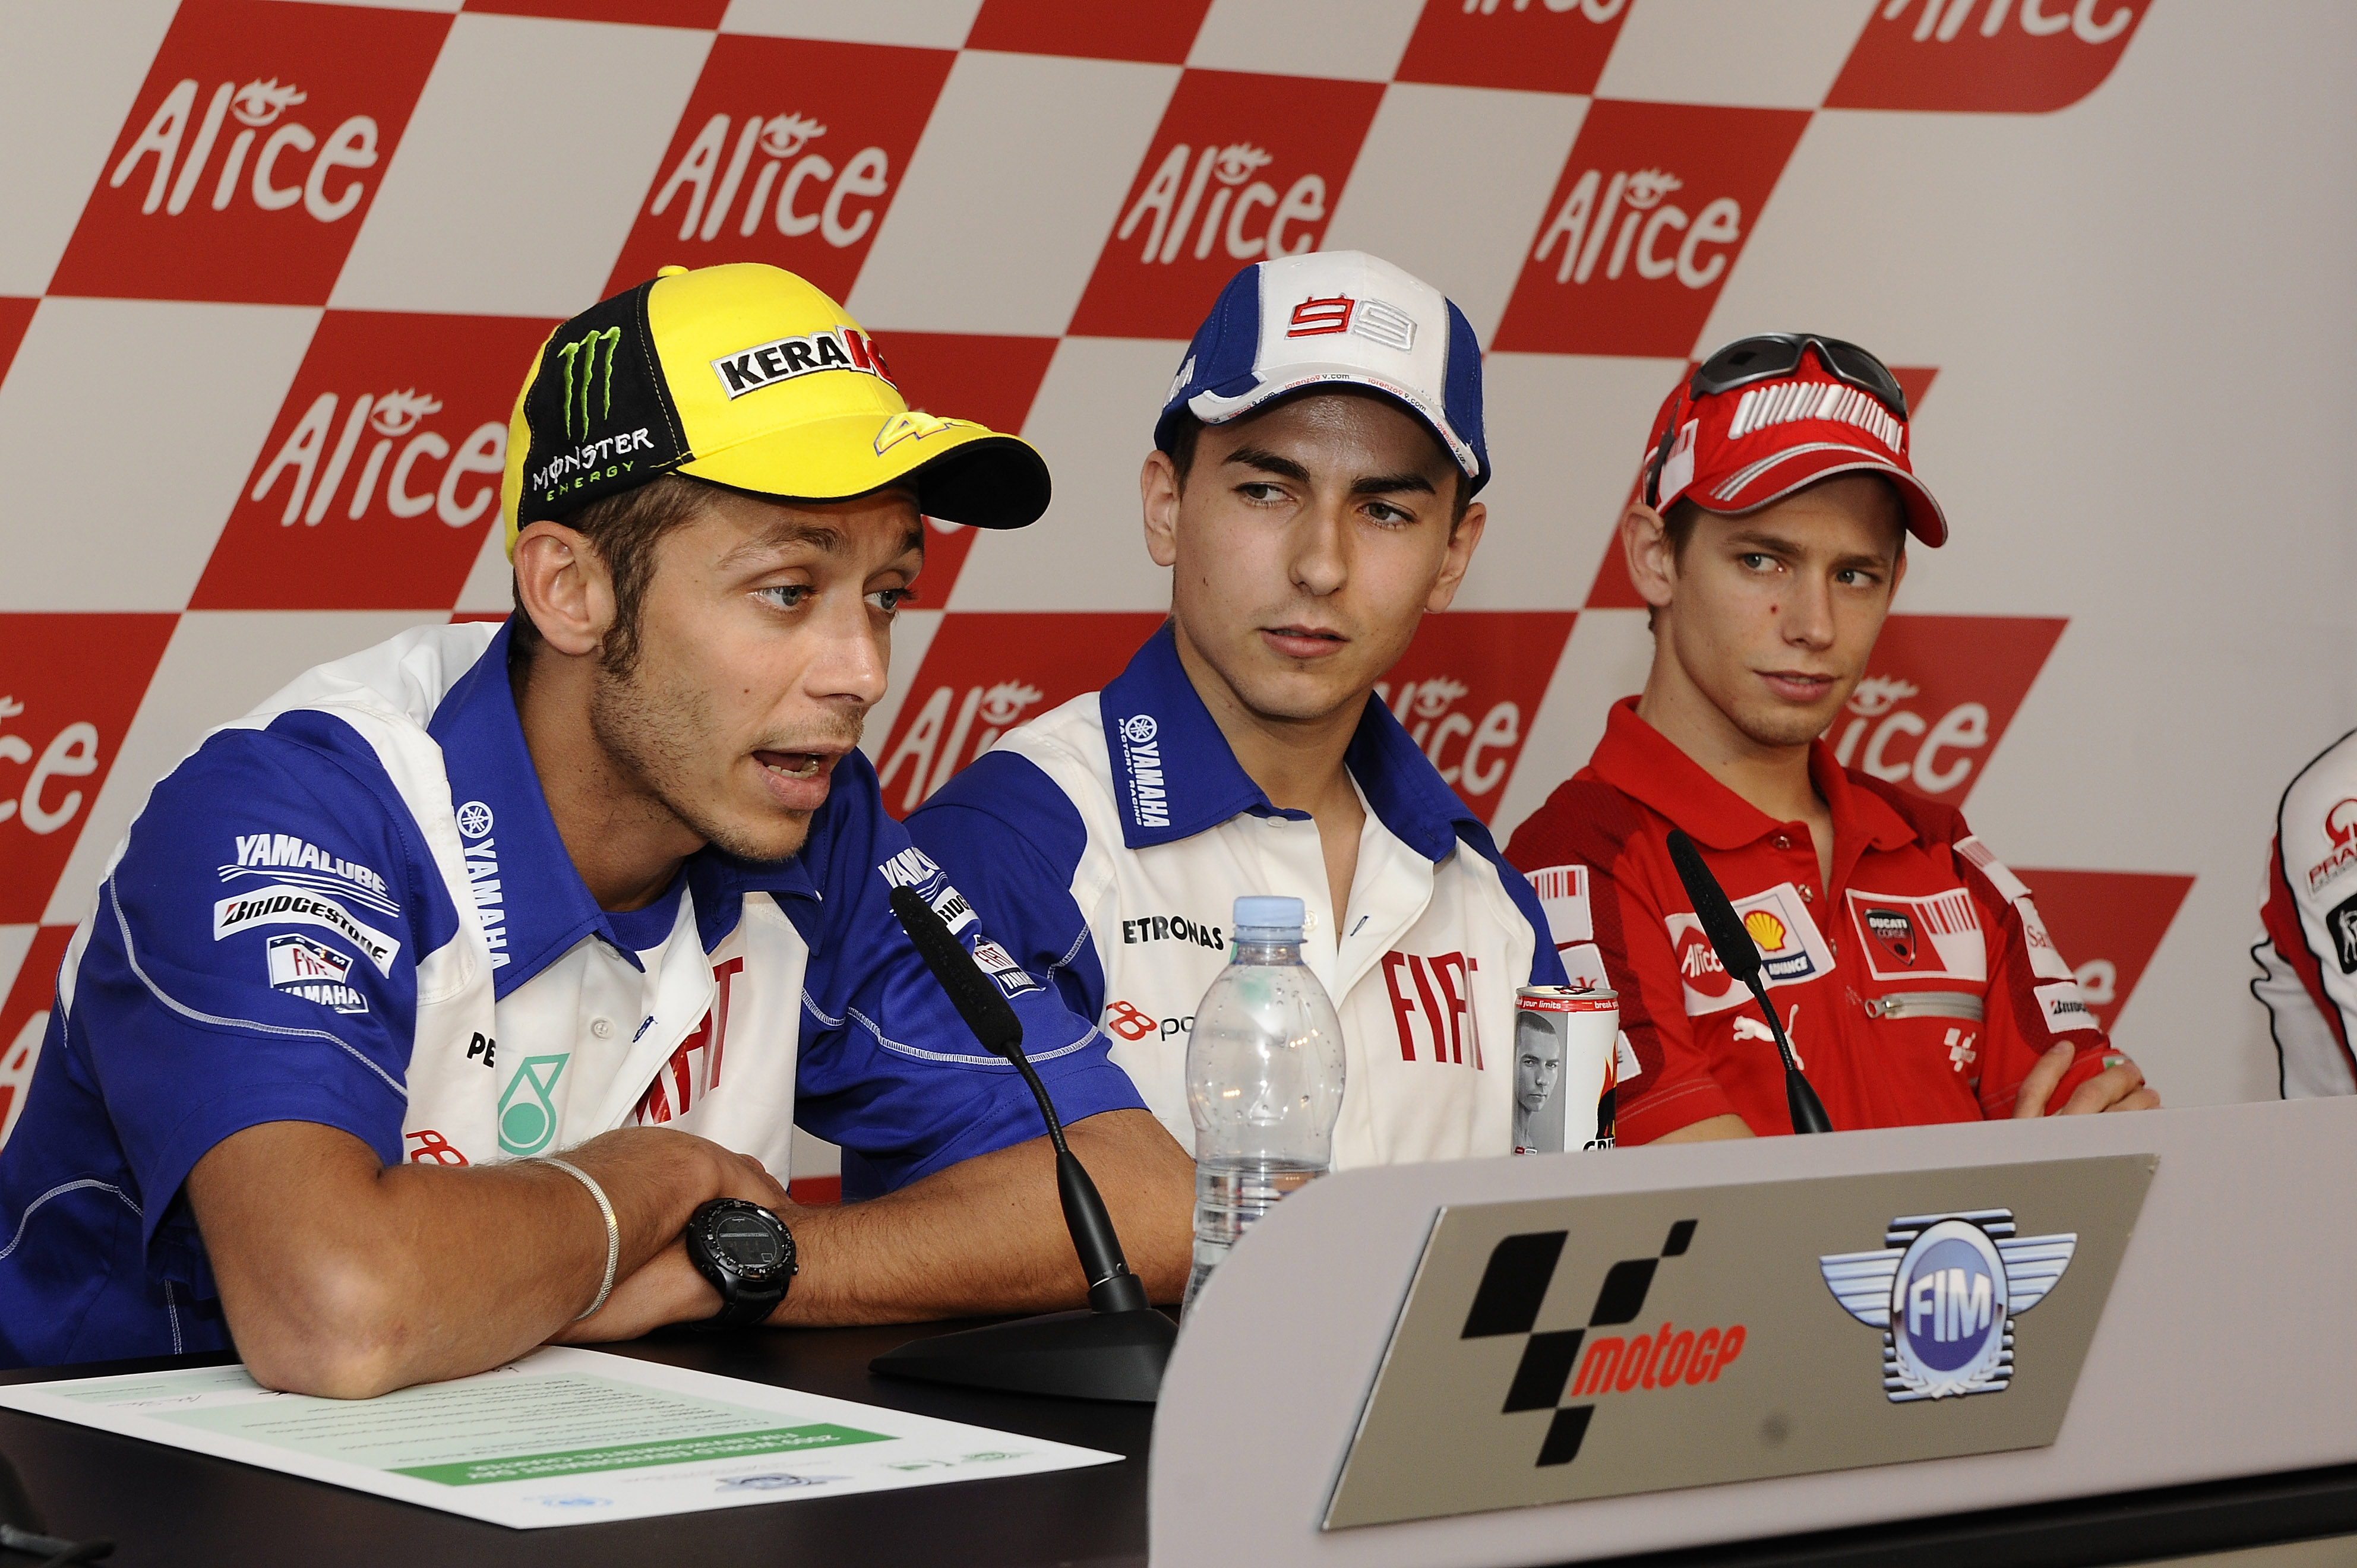 Rossi is world's 5th highest paid motorsport competitor